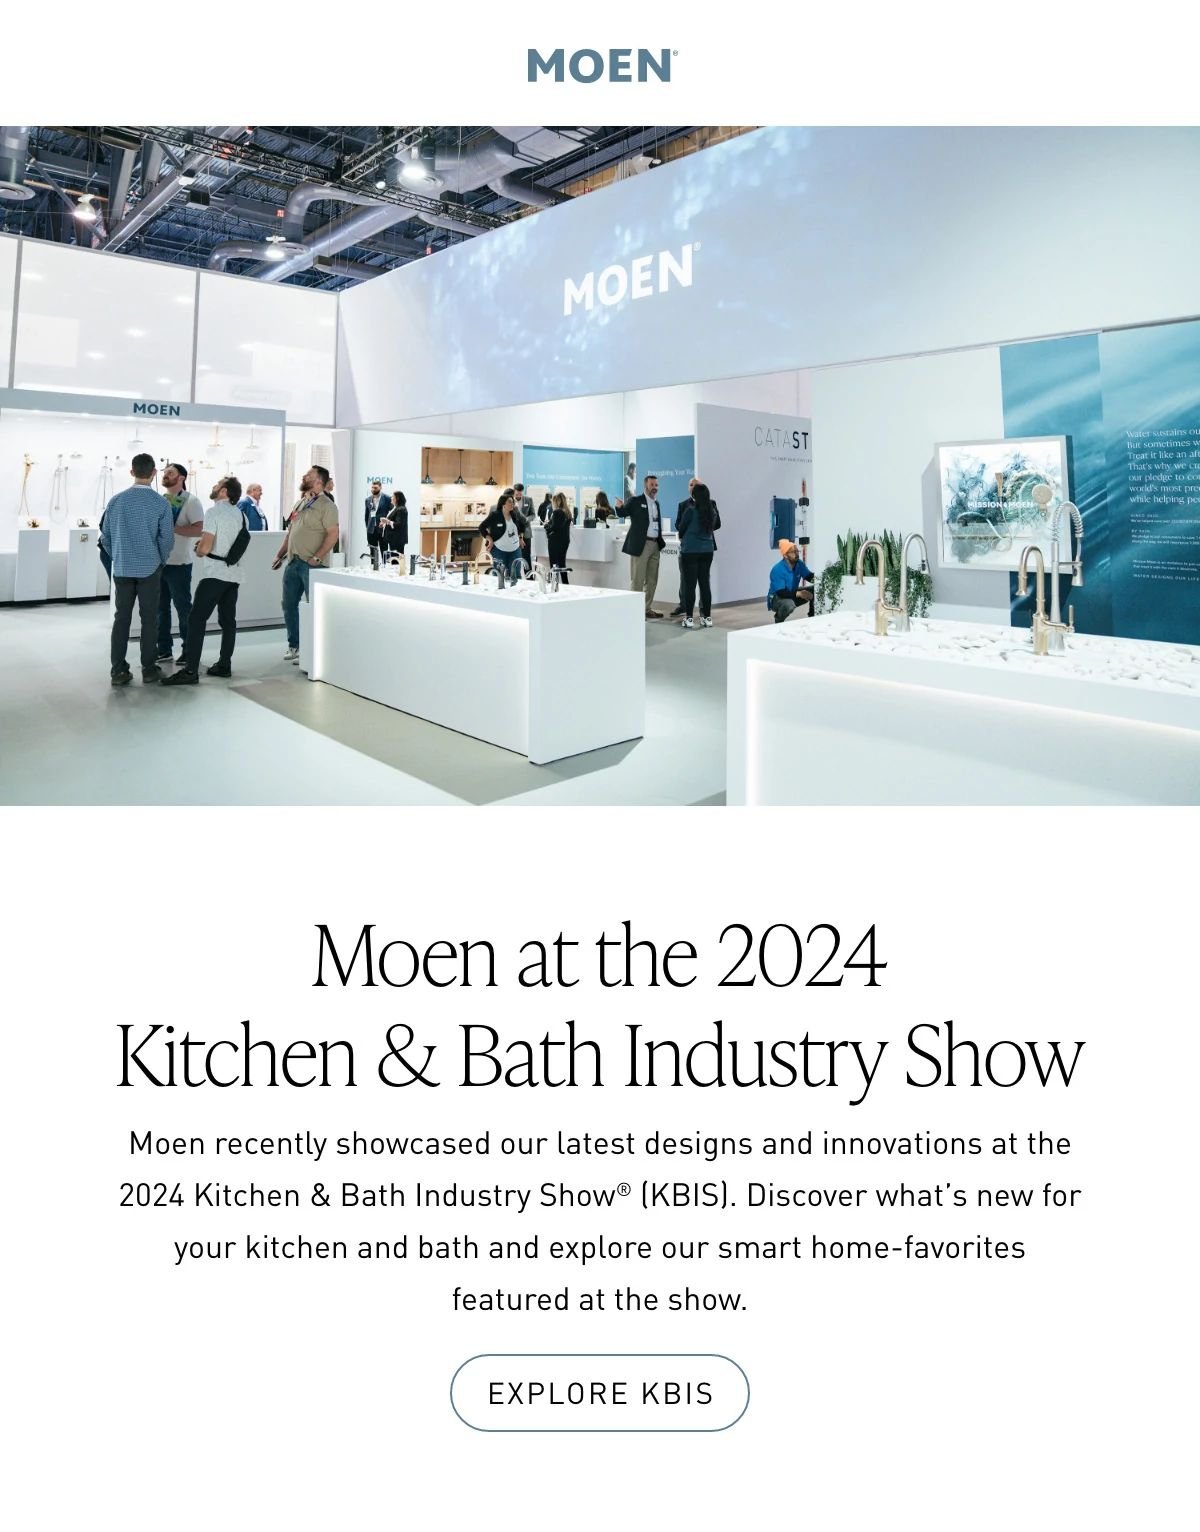 Moen at the Kitchen & Bath Industry Show